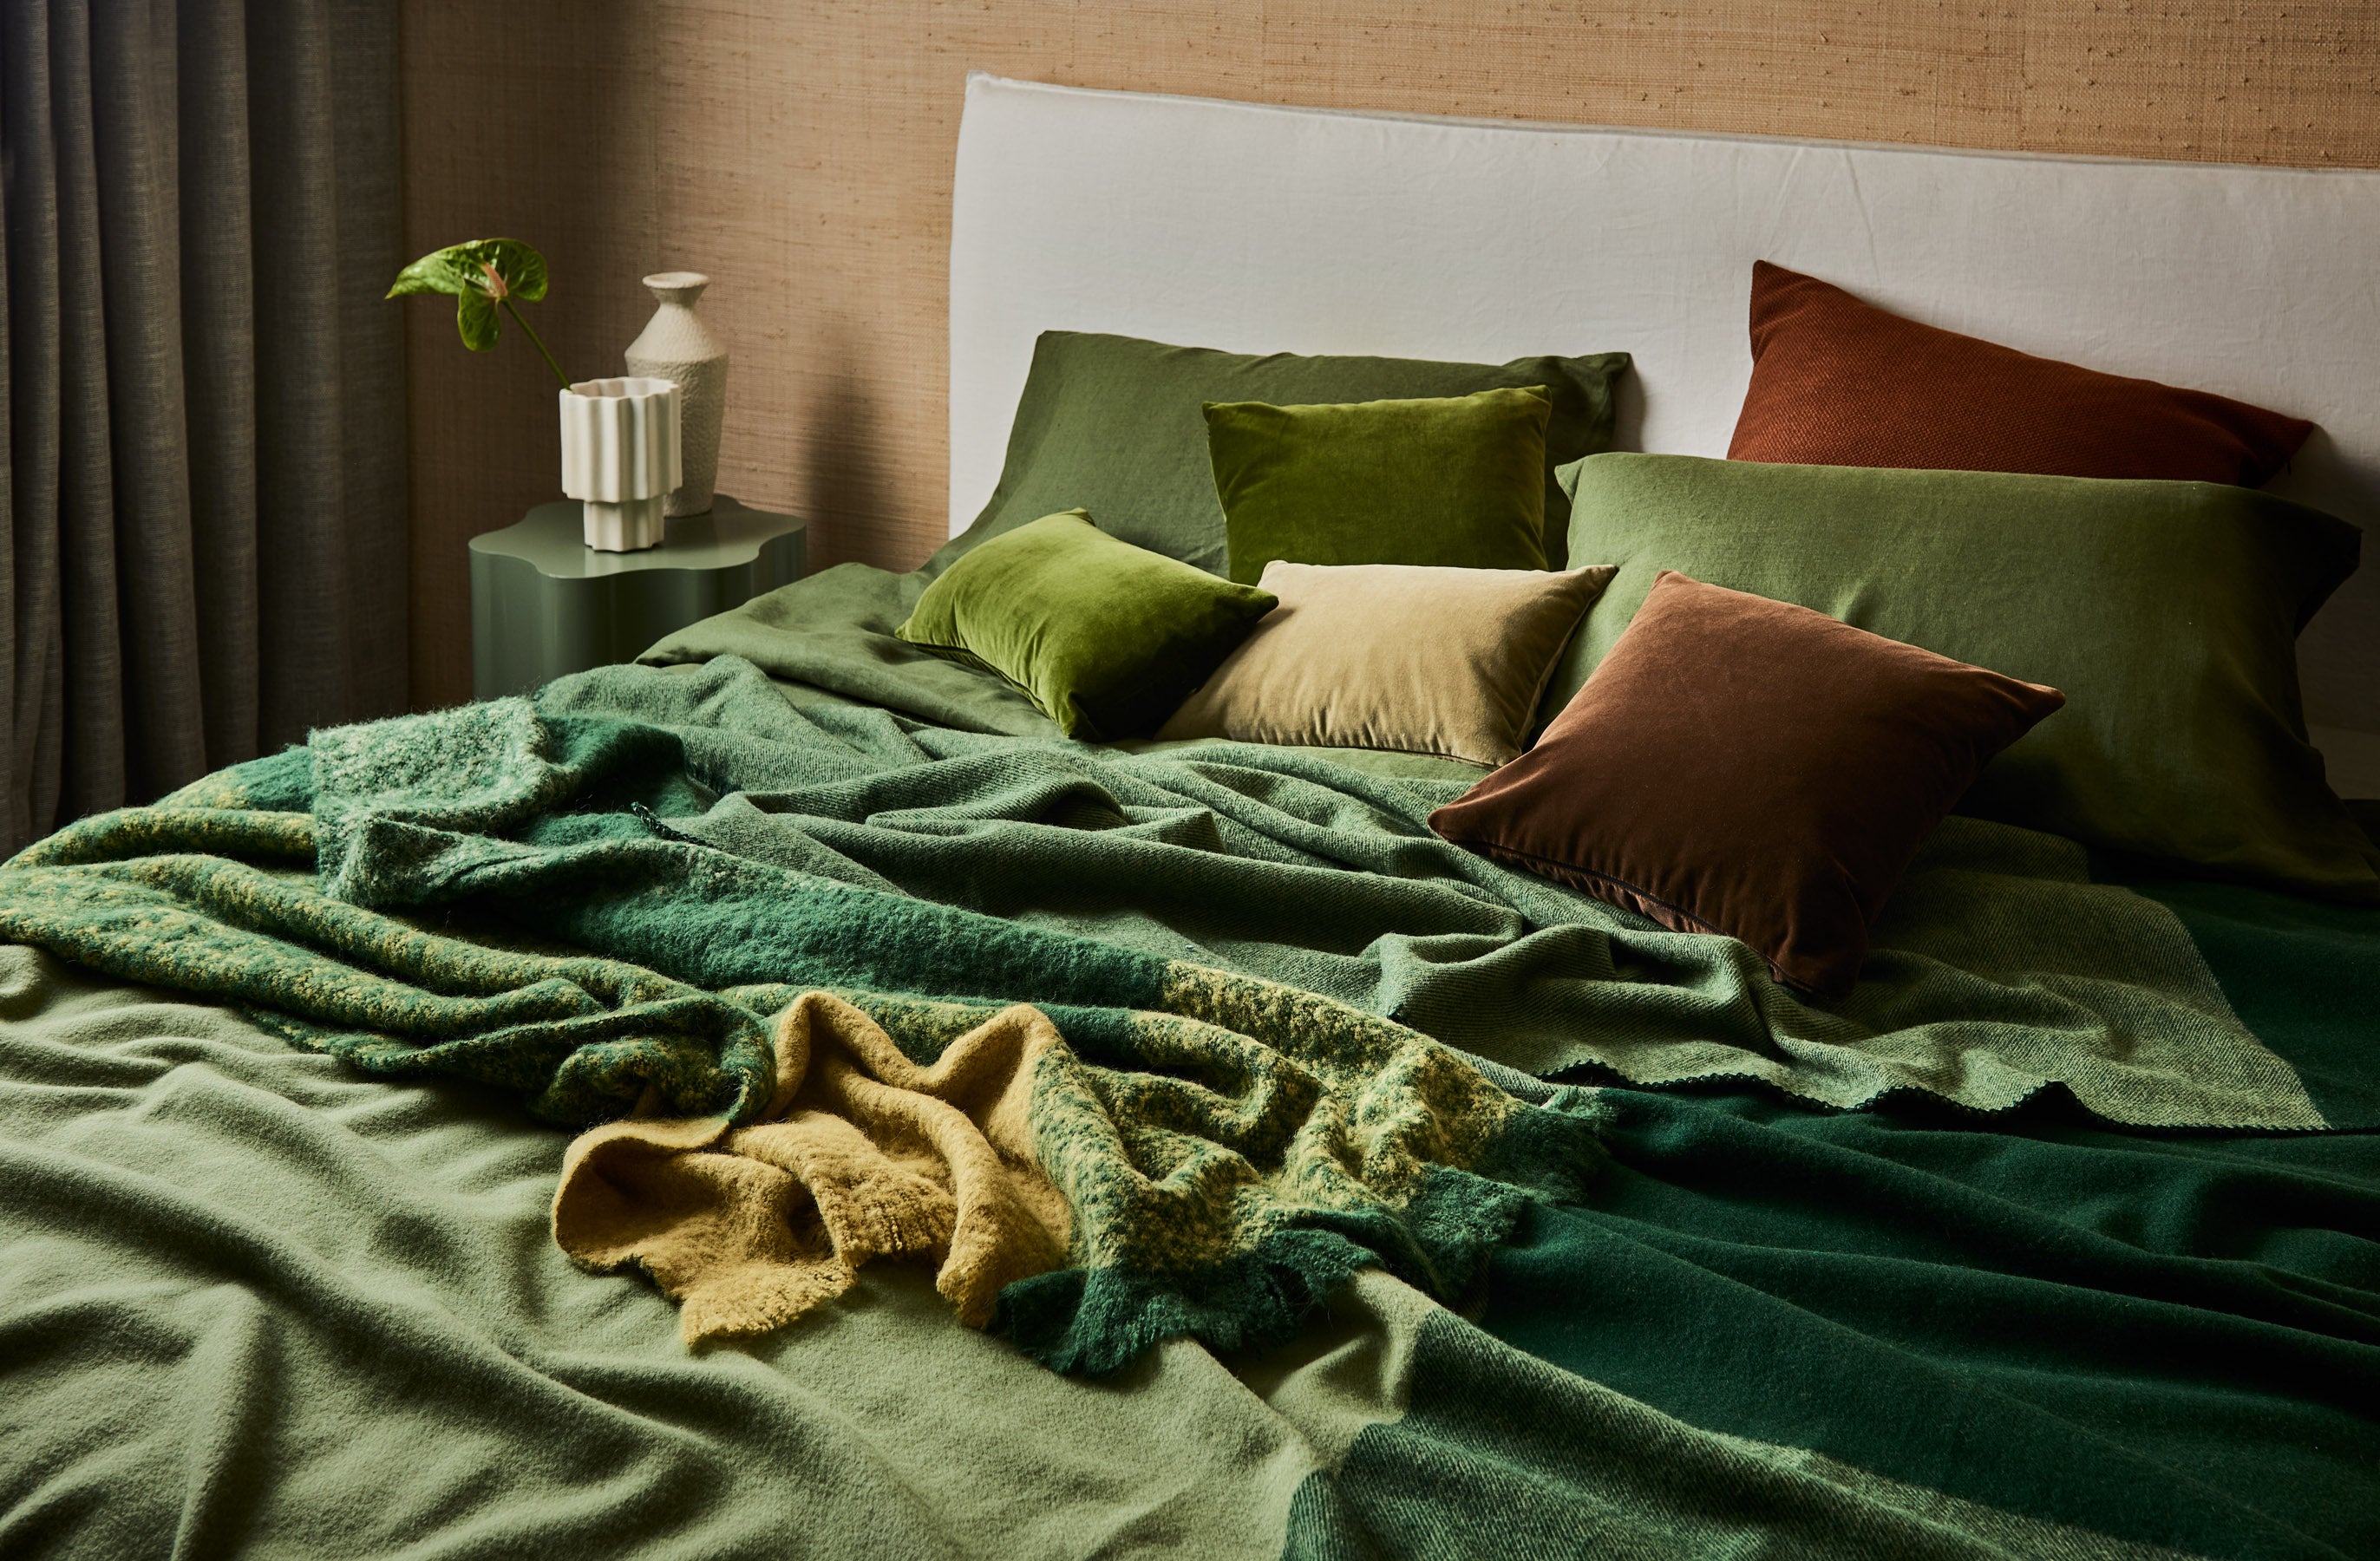 A modern style bed dressed with a merino wool blanket and alpaca throw in tones of green.